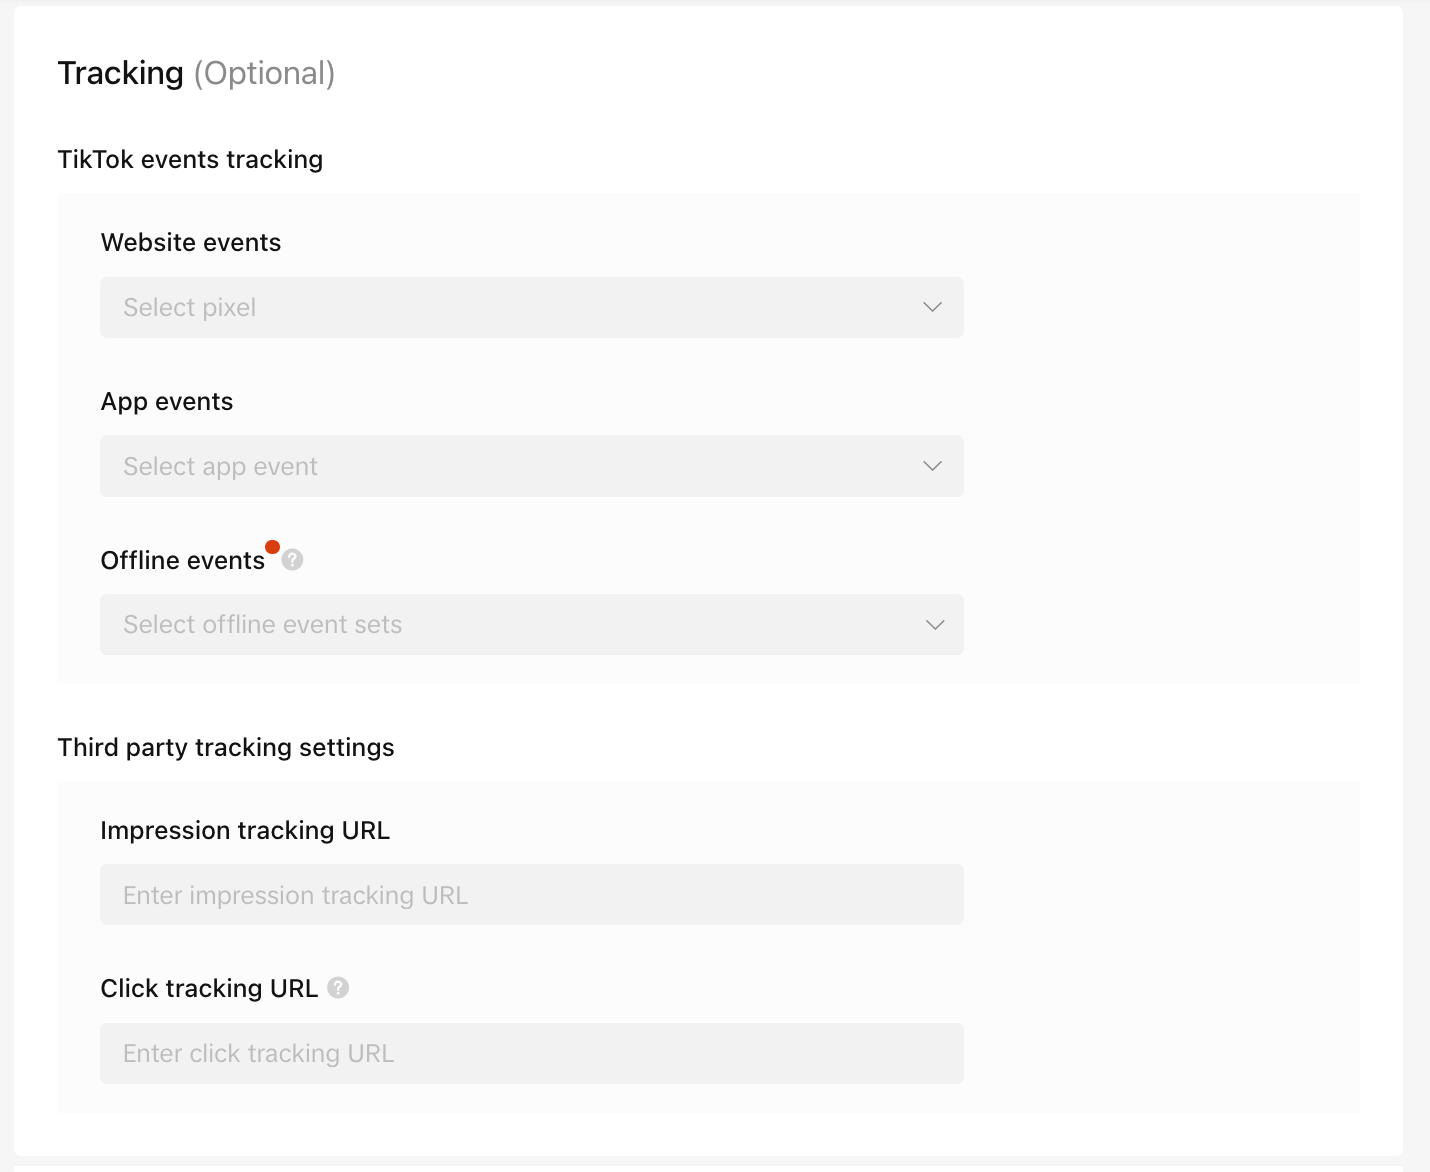 The tracking settings tab in TikTok ad set up process allows you track TikTok events on your website, app and offline.